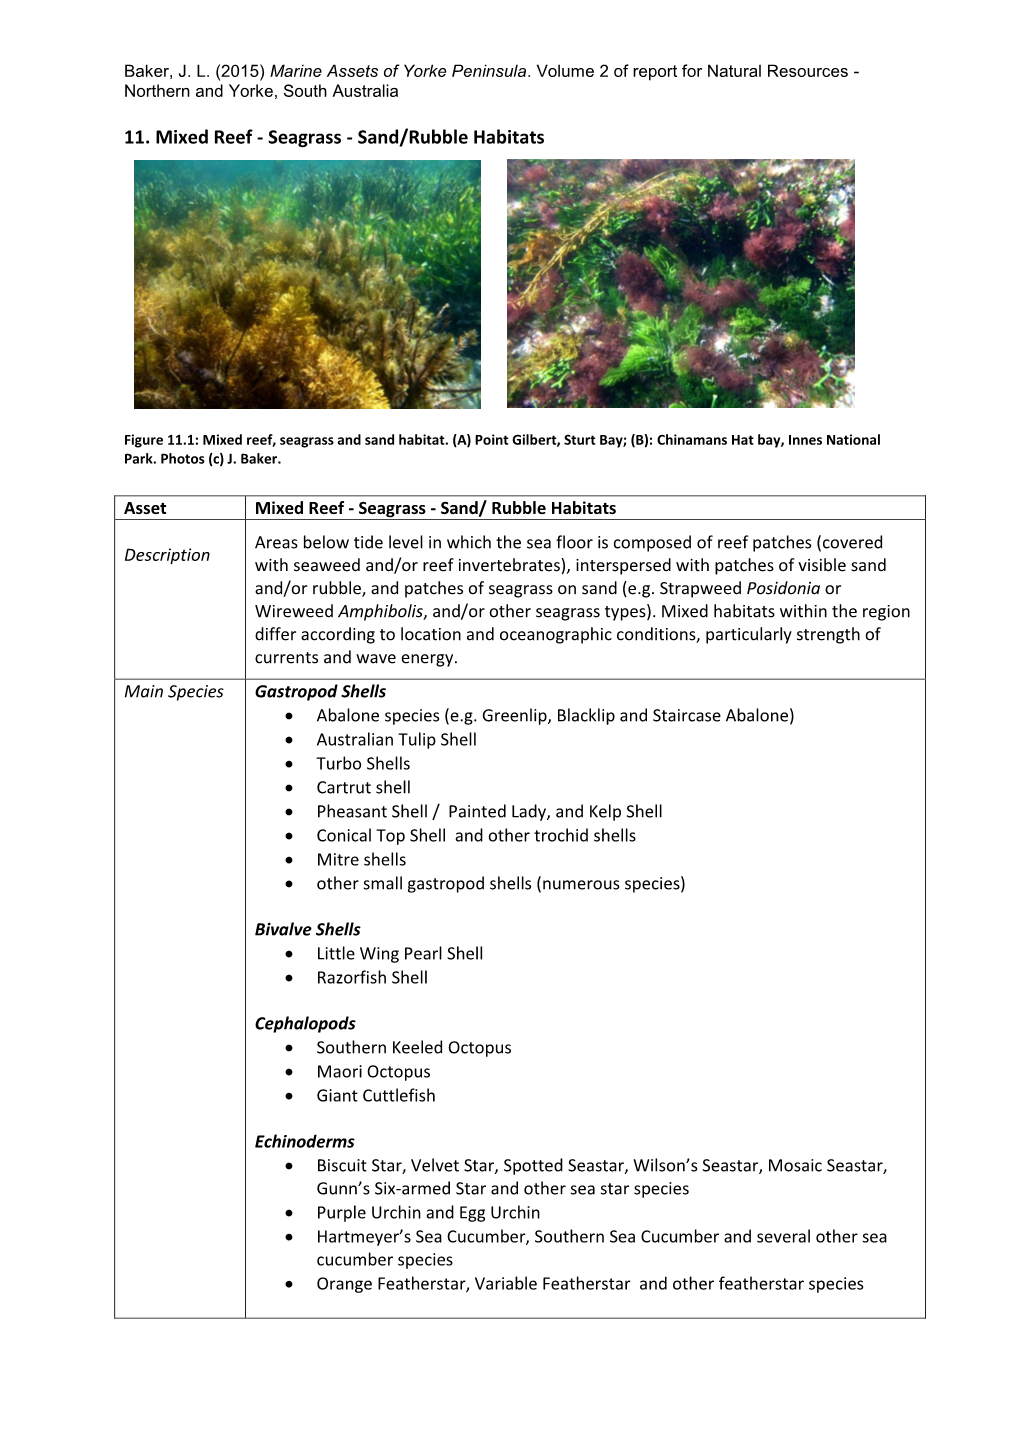 11. Mixed Reef - Seagrass - Sand/Rubble Habitats